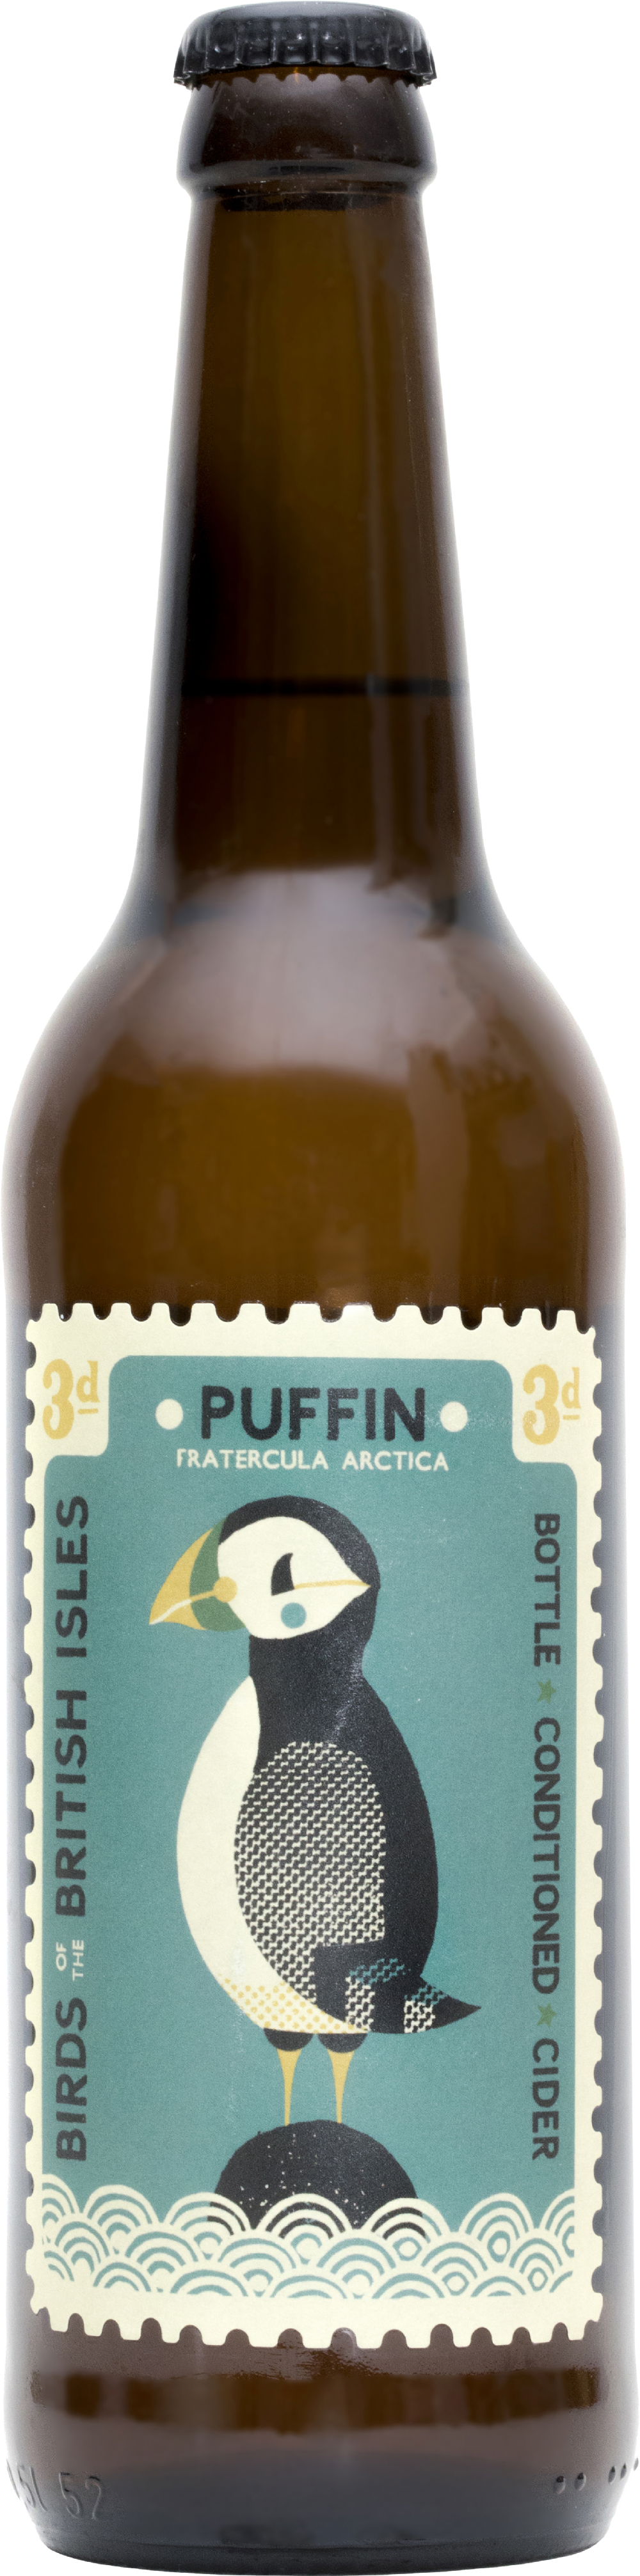 PERRY'S Farmhouse Cider - Puffin 500ml 6.5% ABV